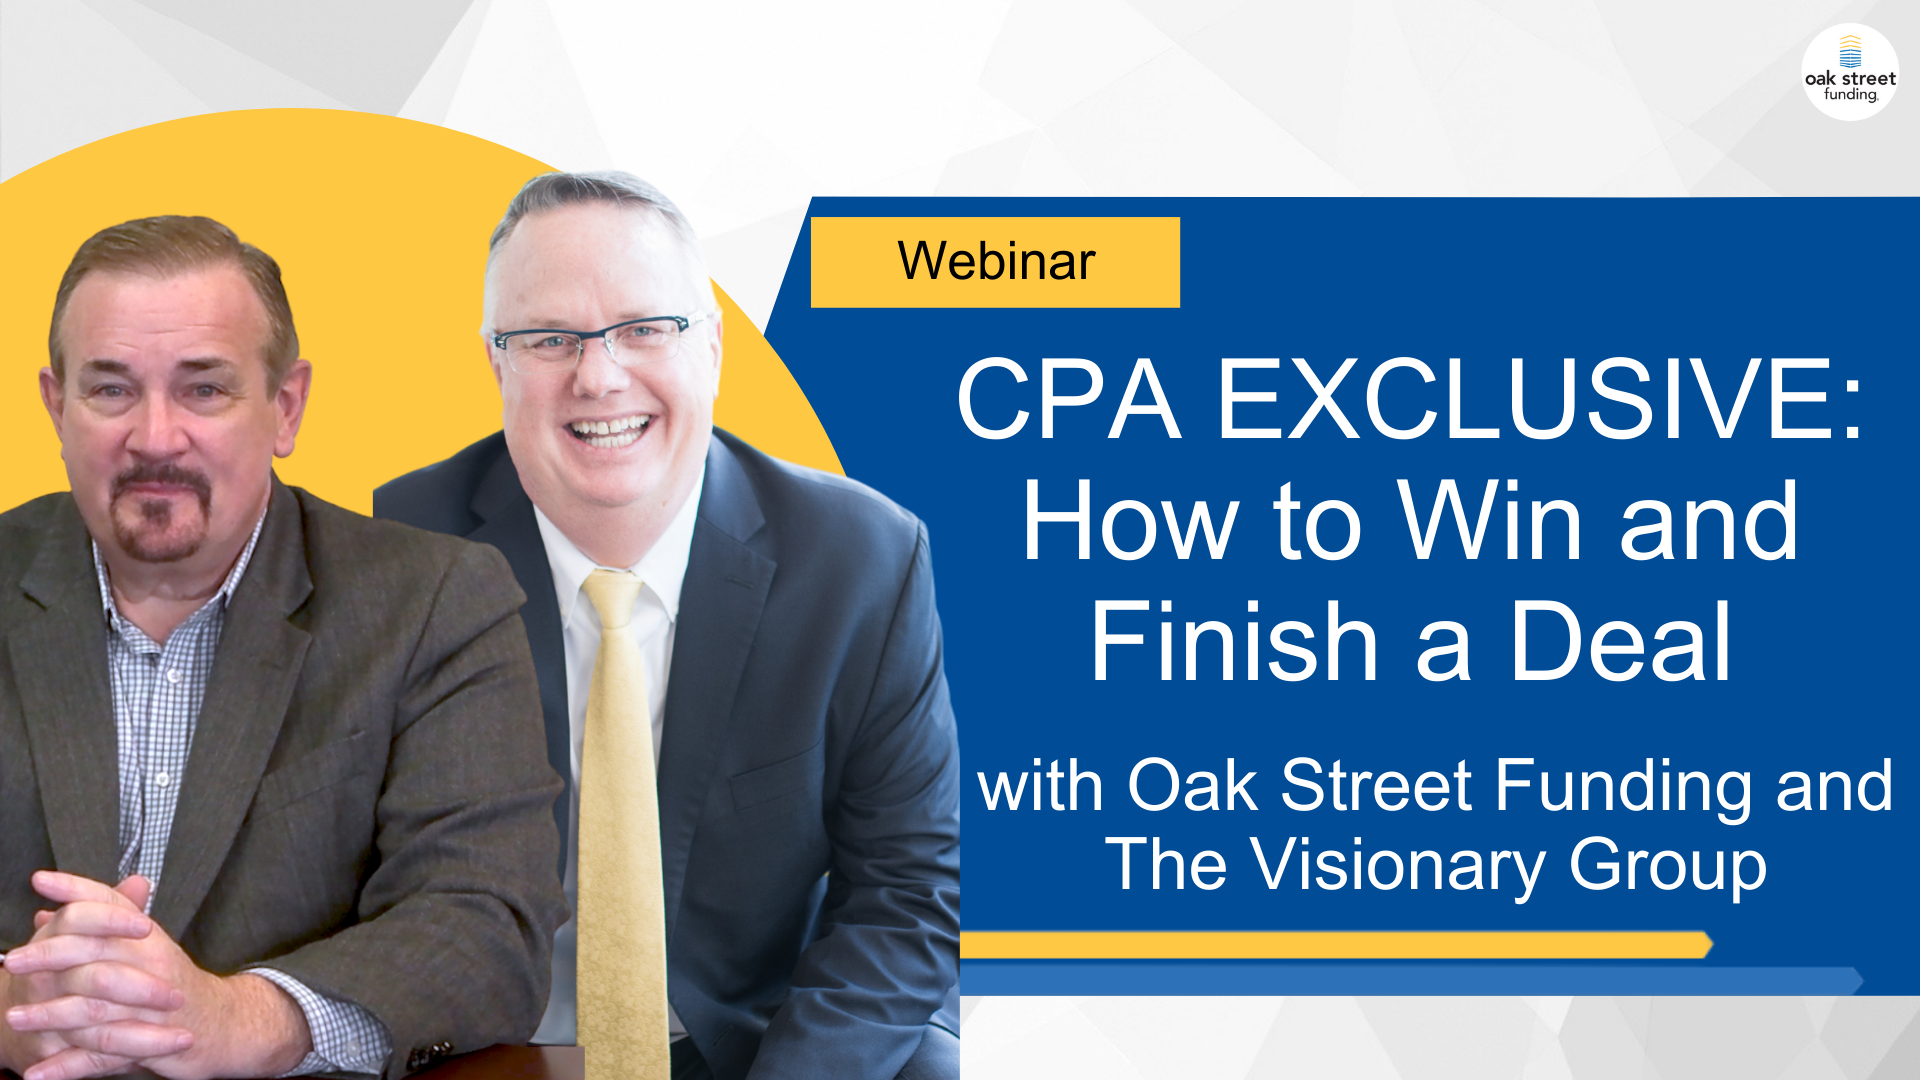 CPA EXCLUSIVE: How to Win and Finish a Deal